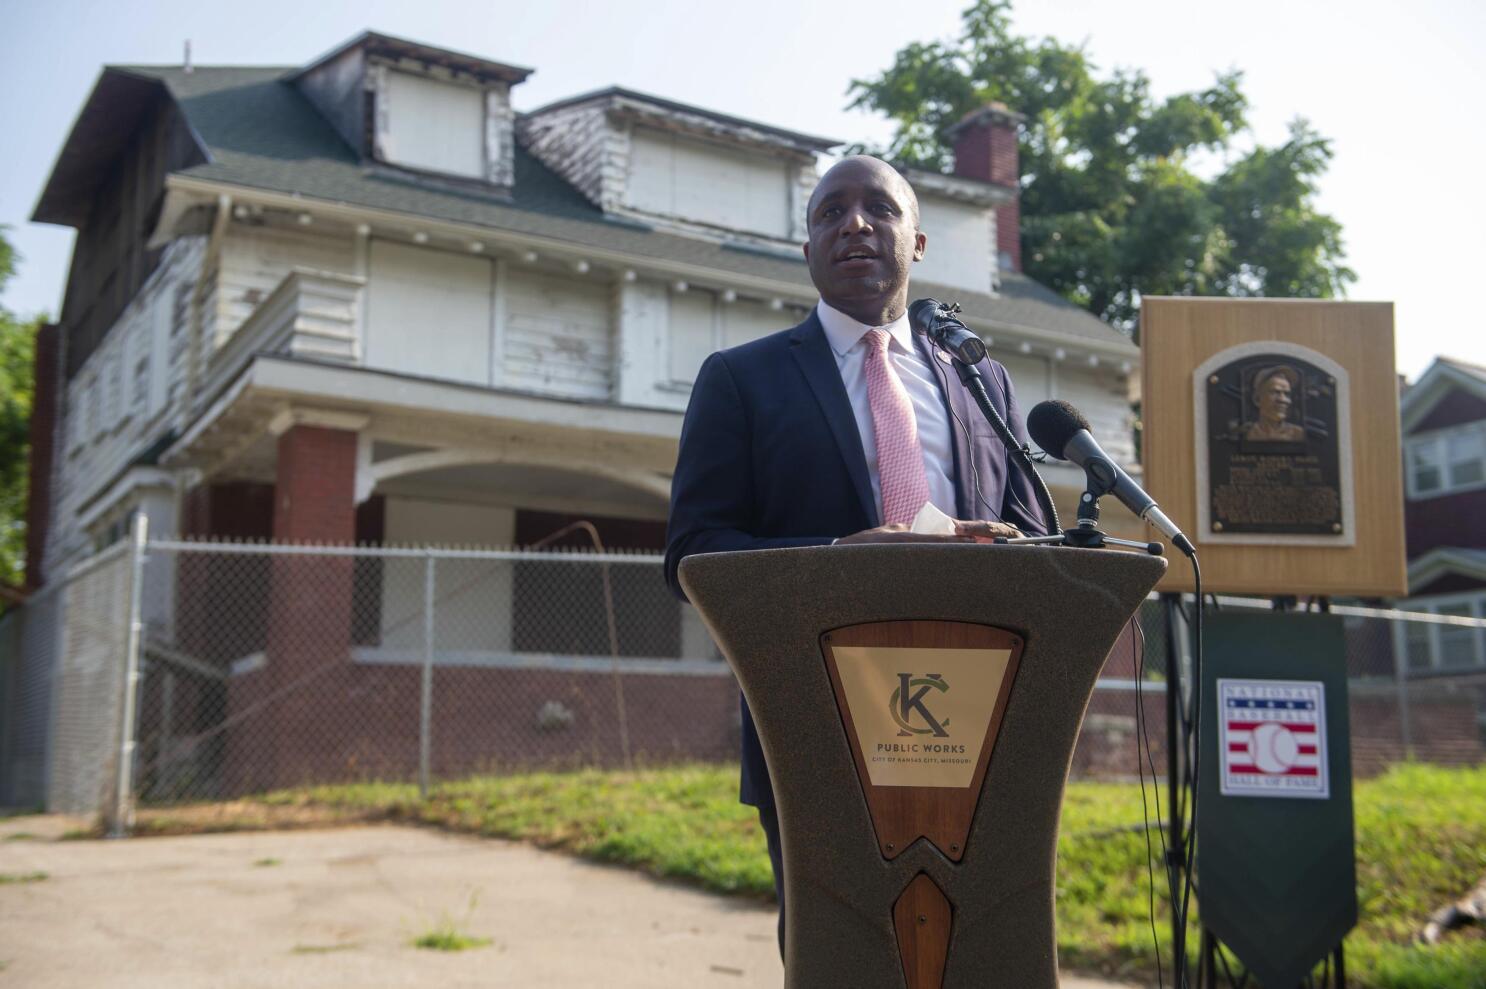 Redevelopment plans for Satchel Paige's former home in Kansas City announced